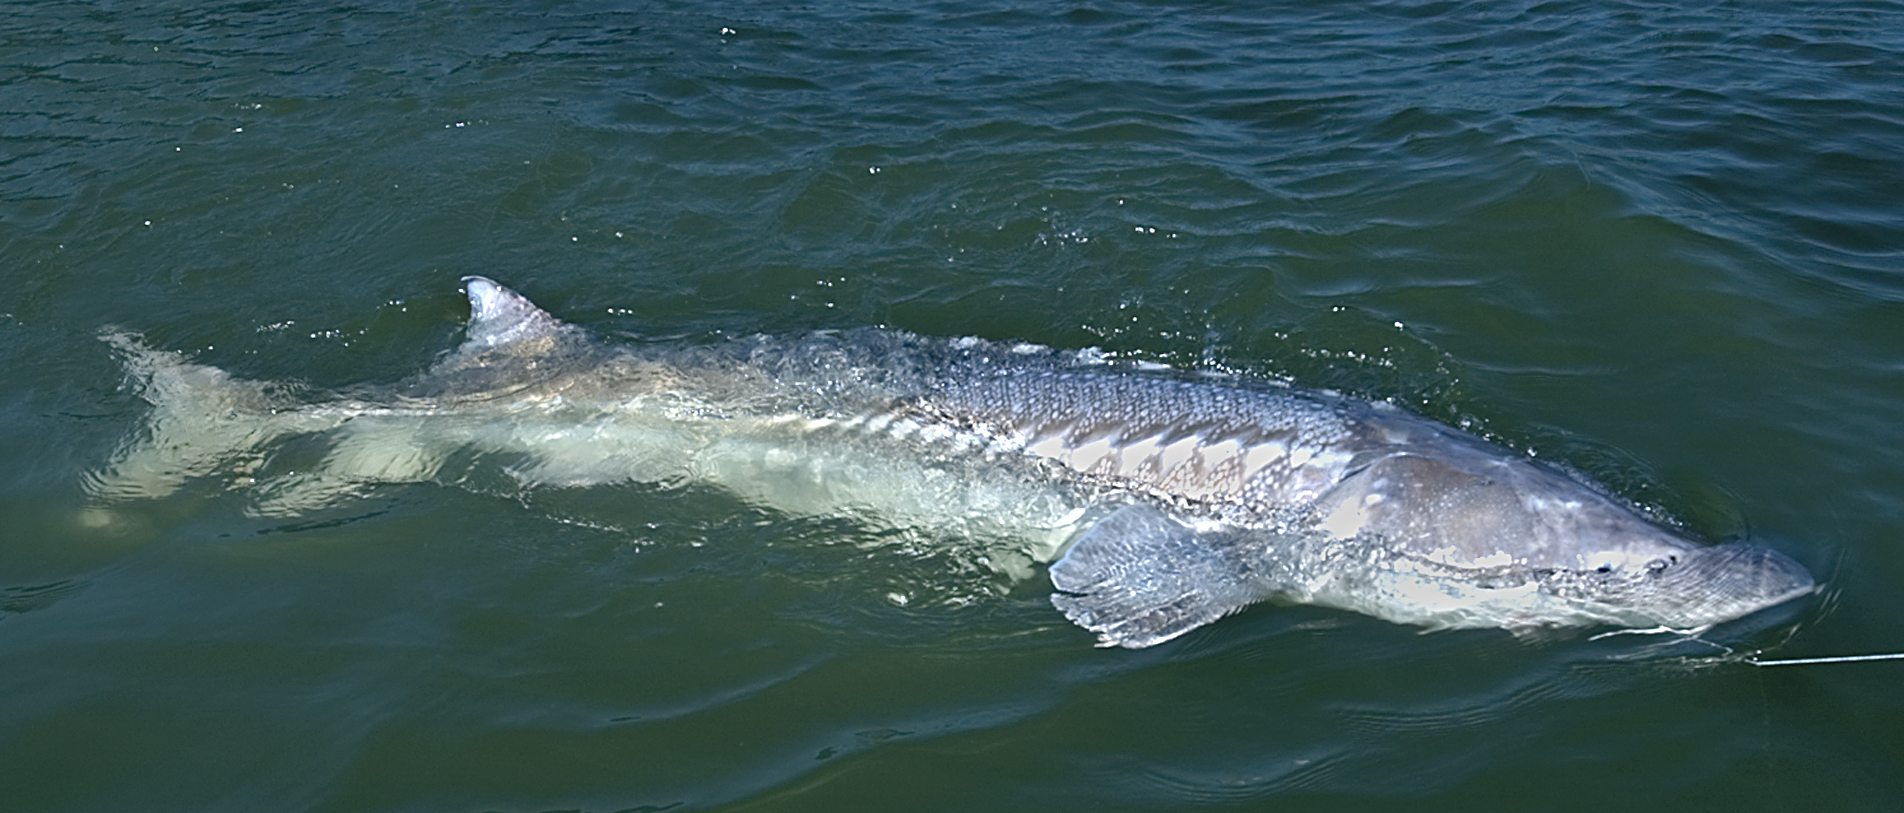 Sturgeon anglers will get reduced catches in 2012.